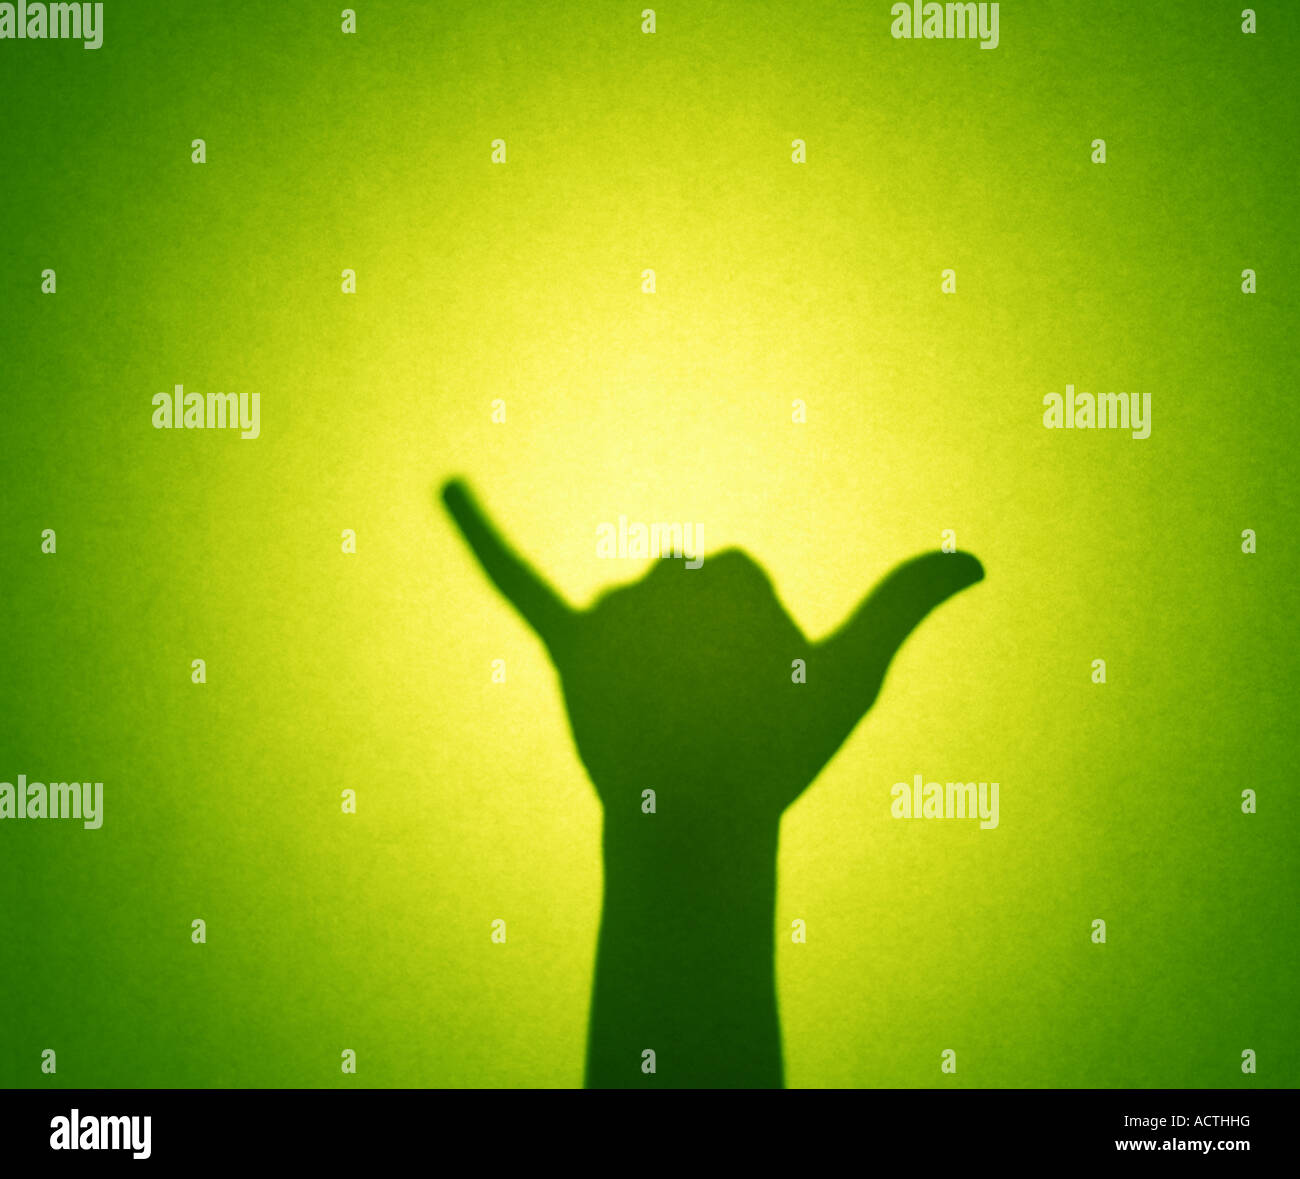 Silhouette of a hand throwing the shaka sign Stock Photo